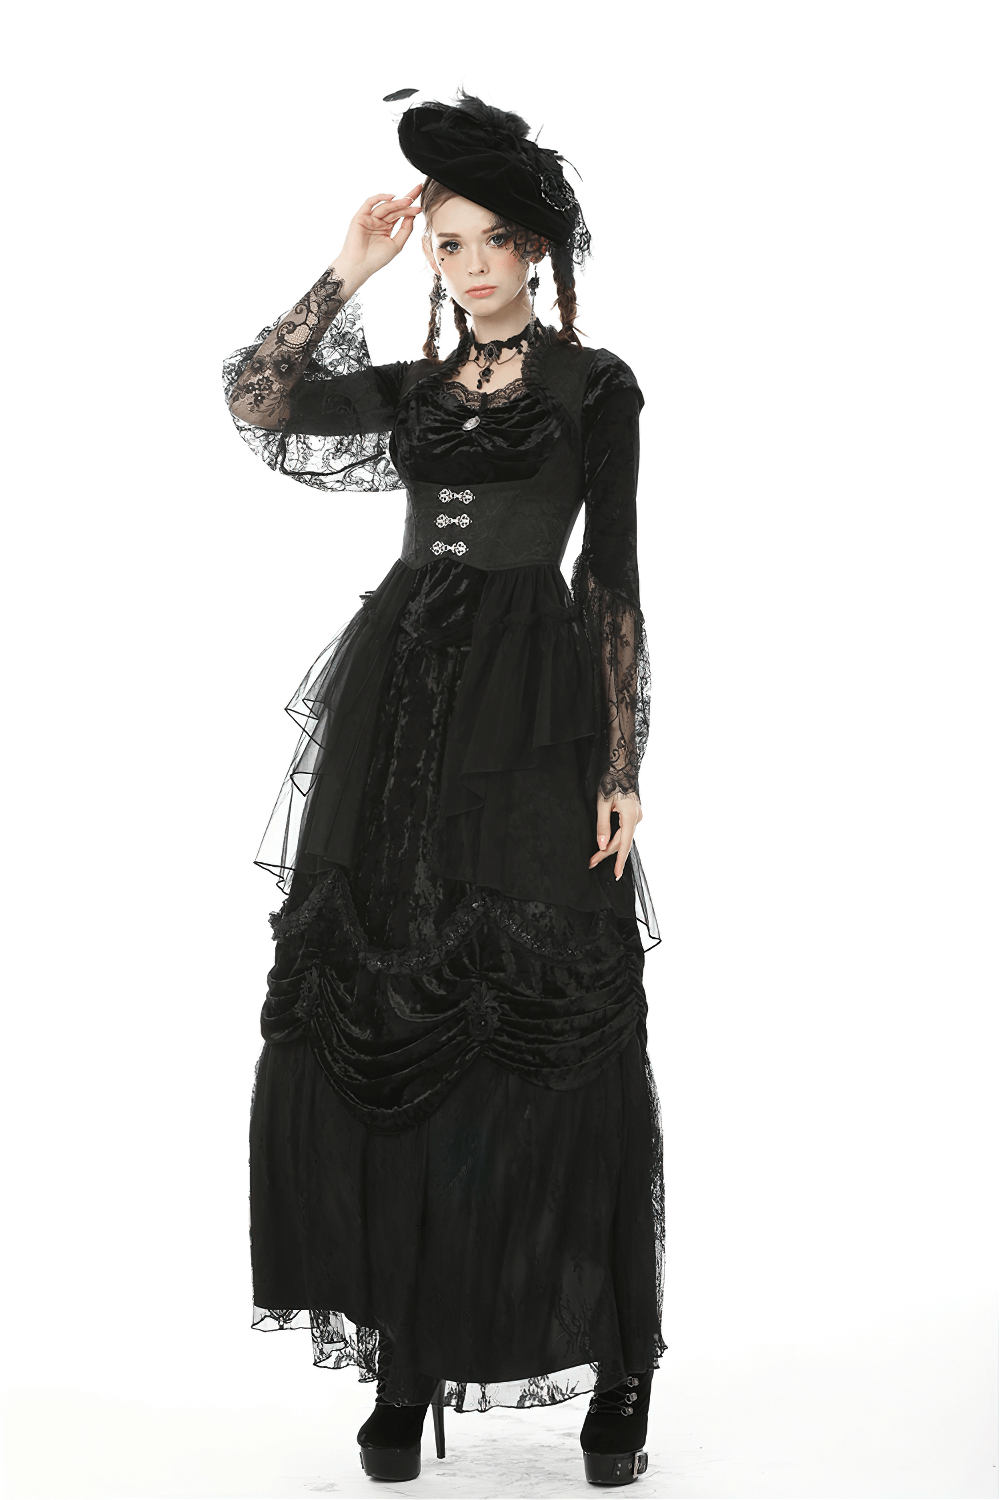 Gothic Women's Waistcoat with Mesh Front and Fishtail Hem